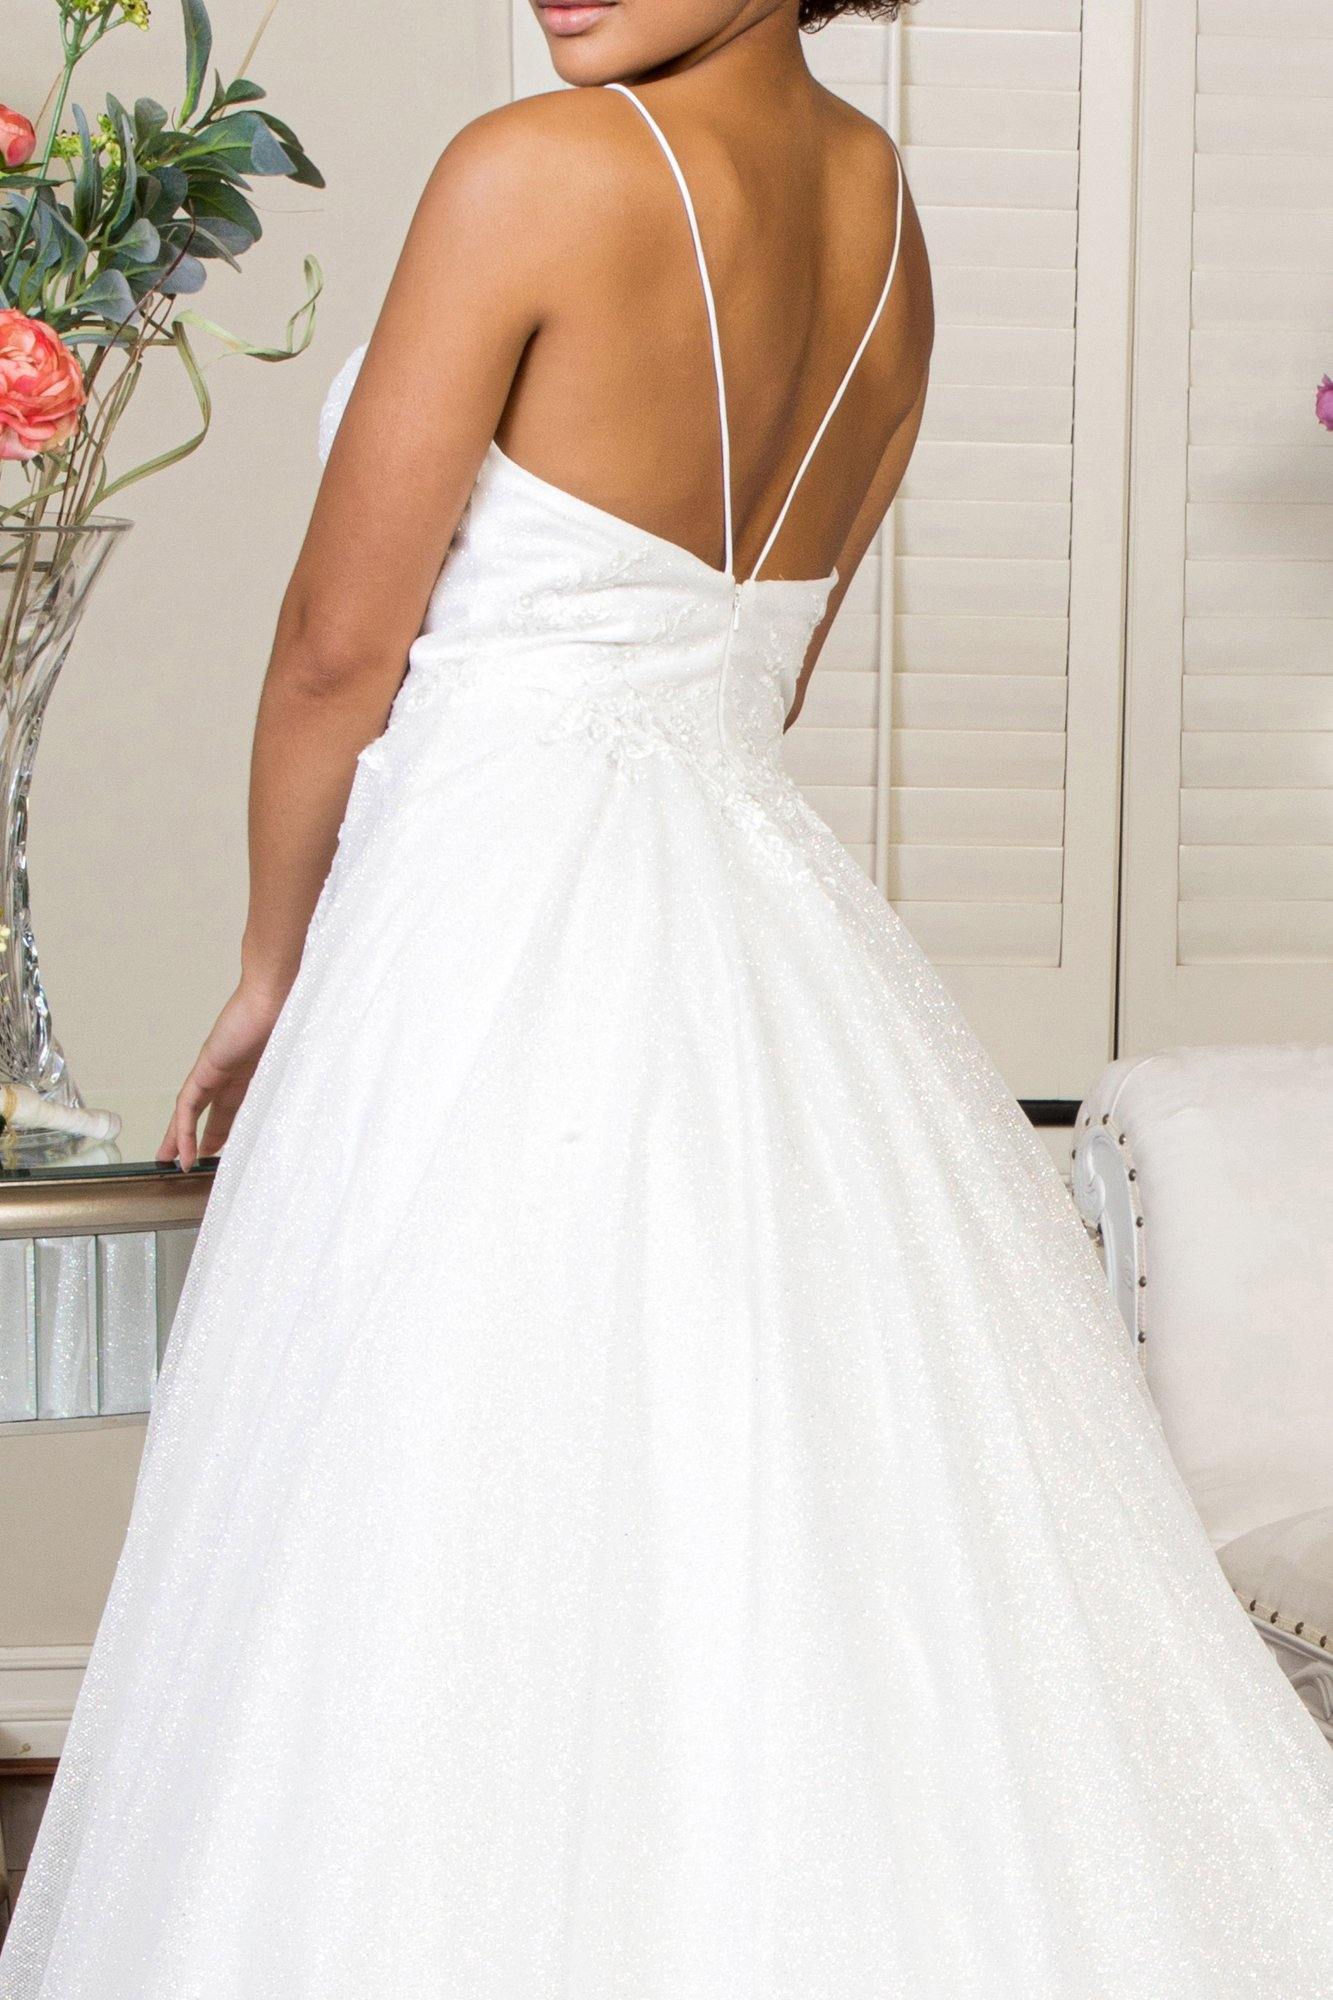 Long Spaghetti Strap Glitter Mesh Wedding Gown - The Dress Outlet